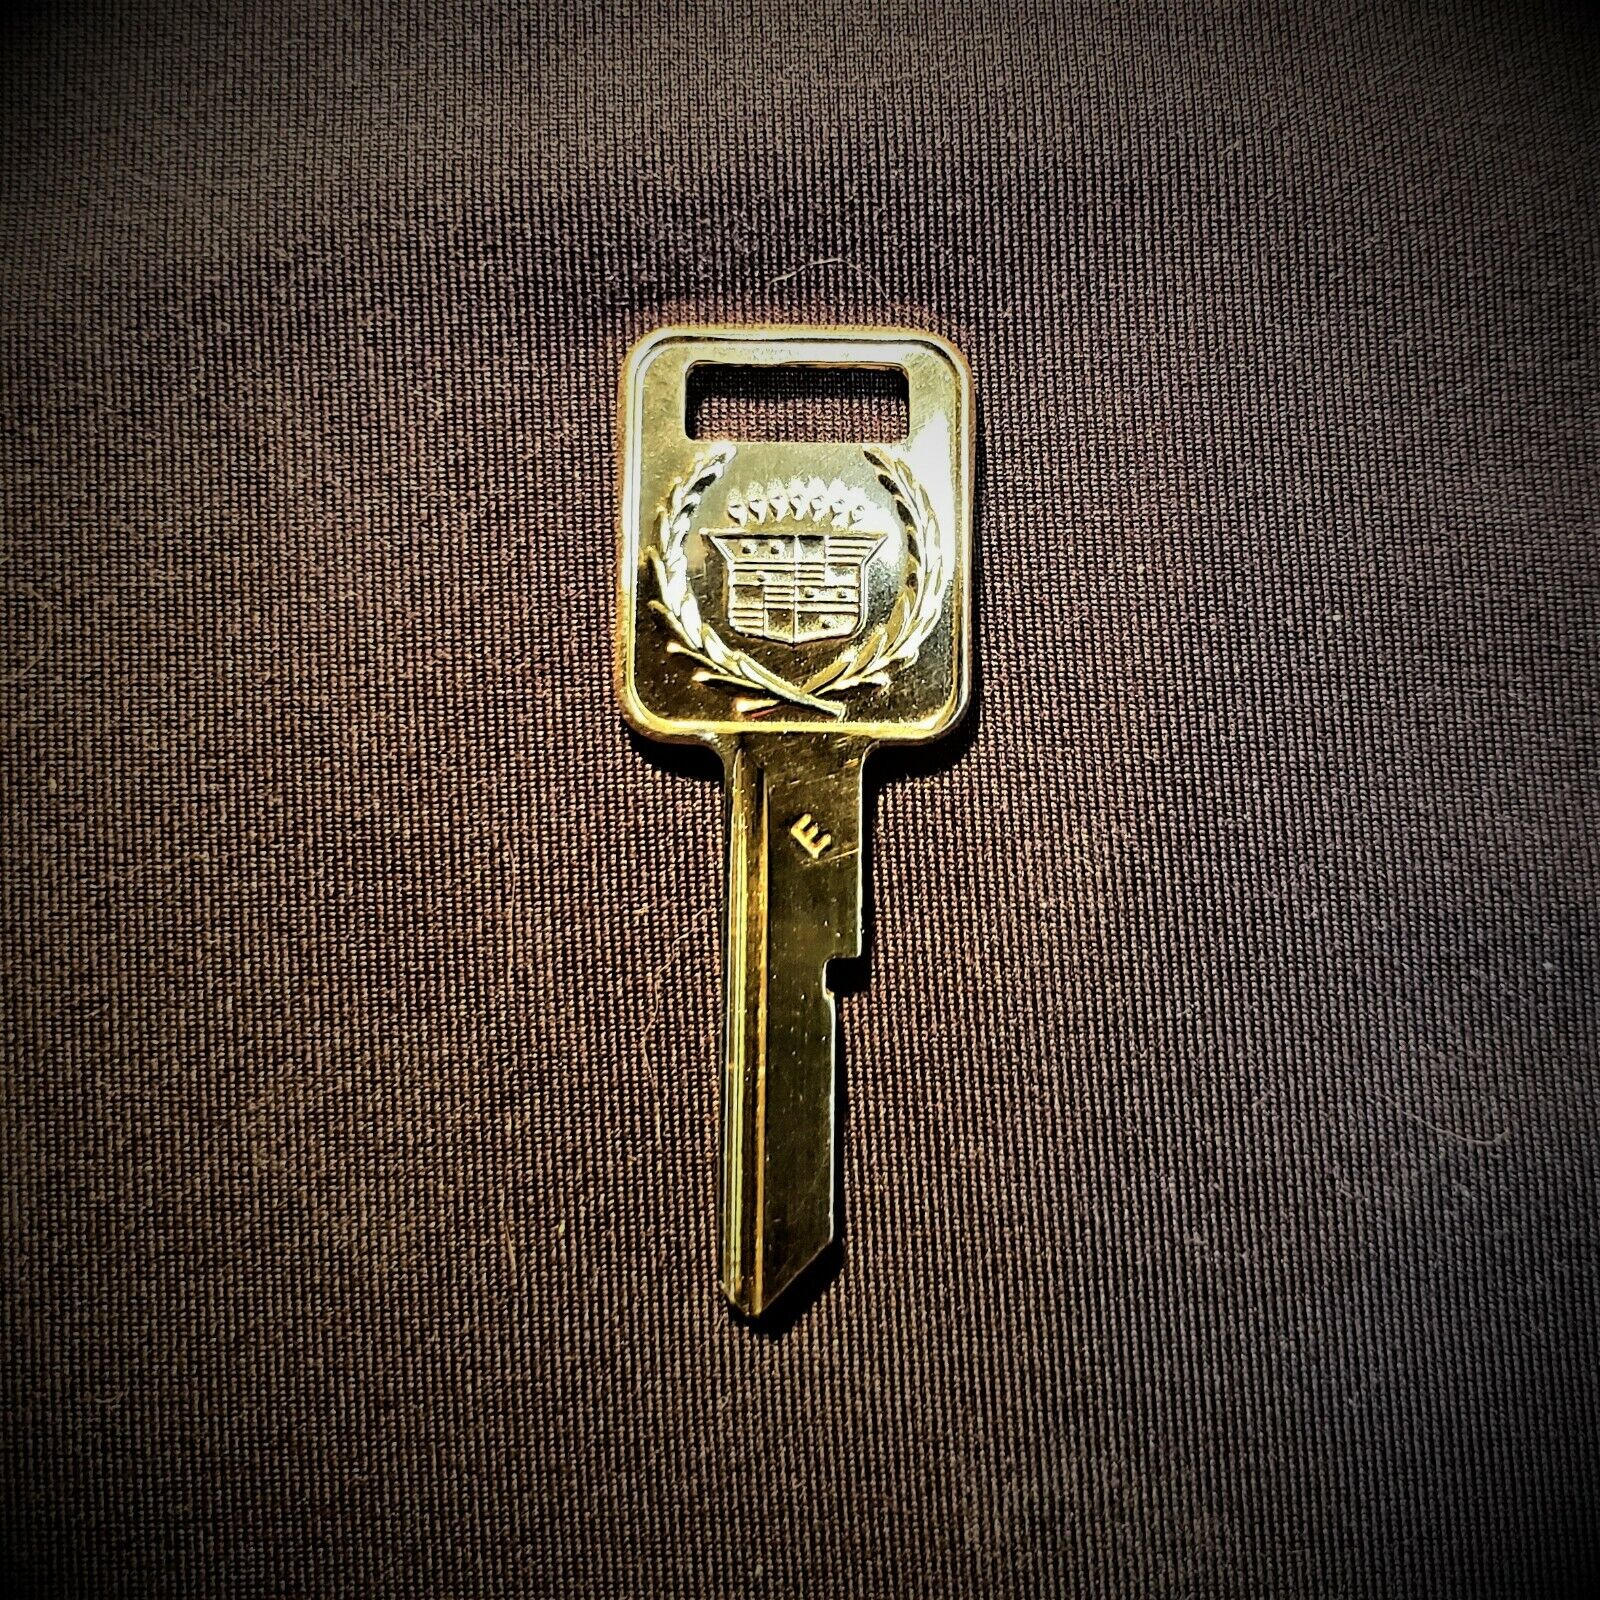 Rare Cadillac Gold Key - 'E' Ignition for All Models - 1969, 1973, 1977, 1981